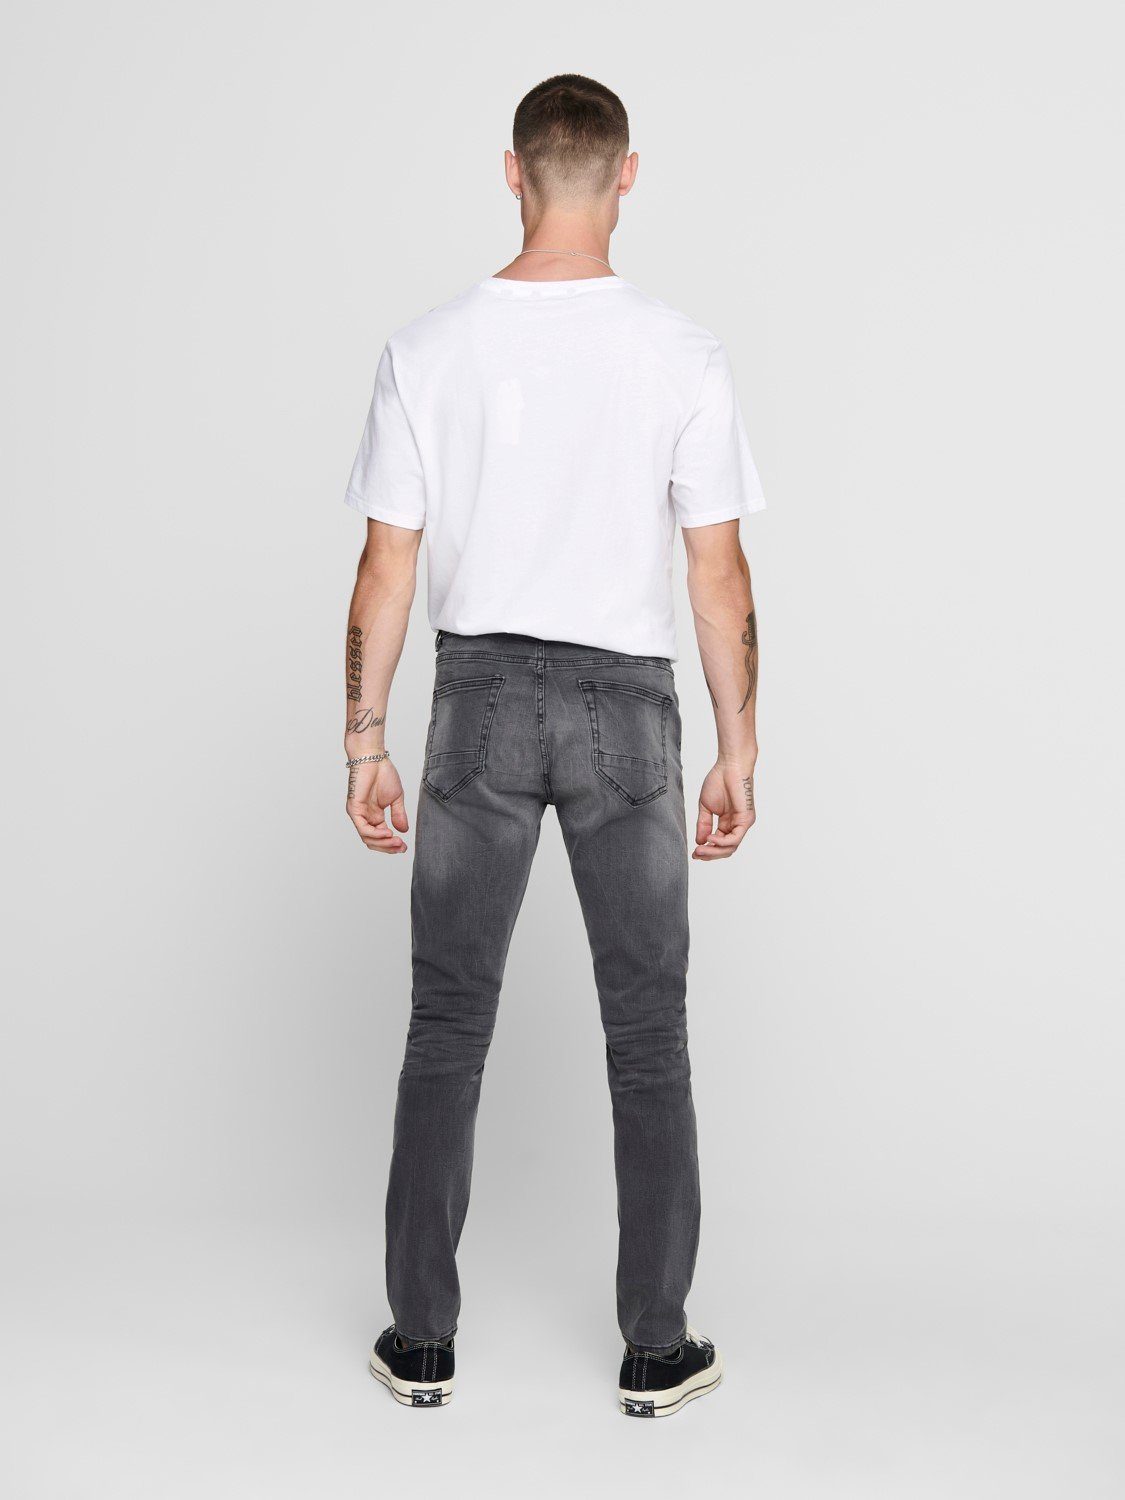 Washed Stoned (1-tlg) Hose Basic Slim-fit-Jeans ONSWARP SONS in Fit Grau Skinny Jeans Pants Denim ONLY & 3977